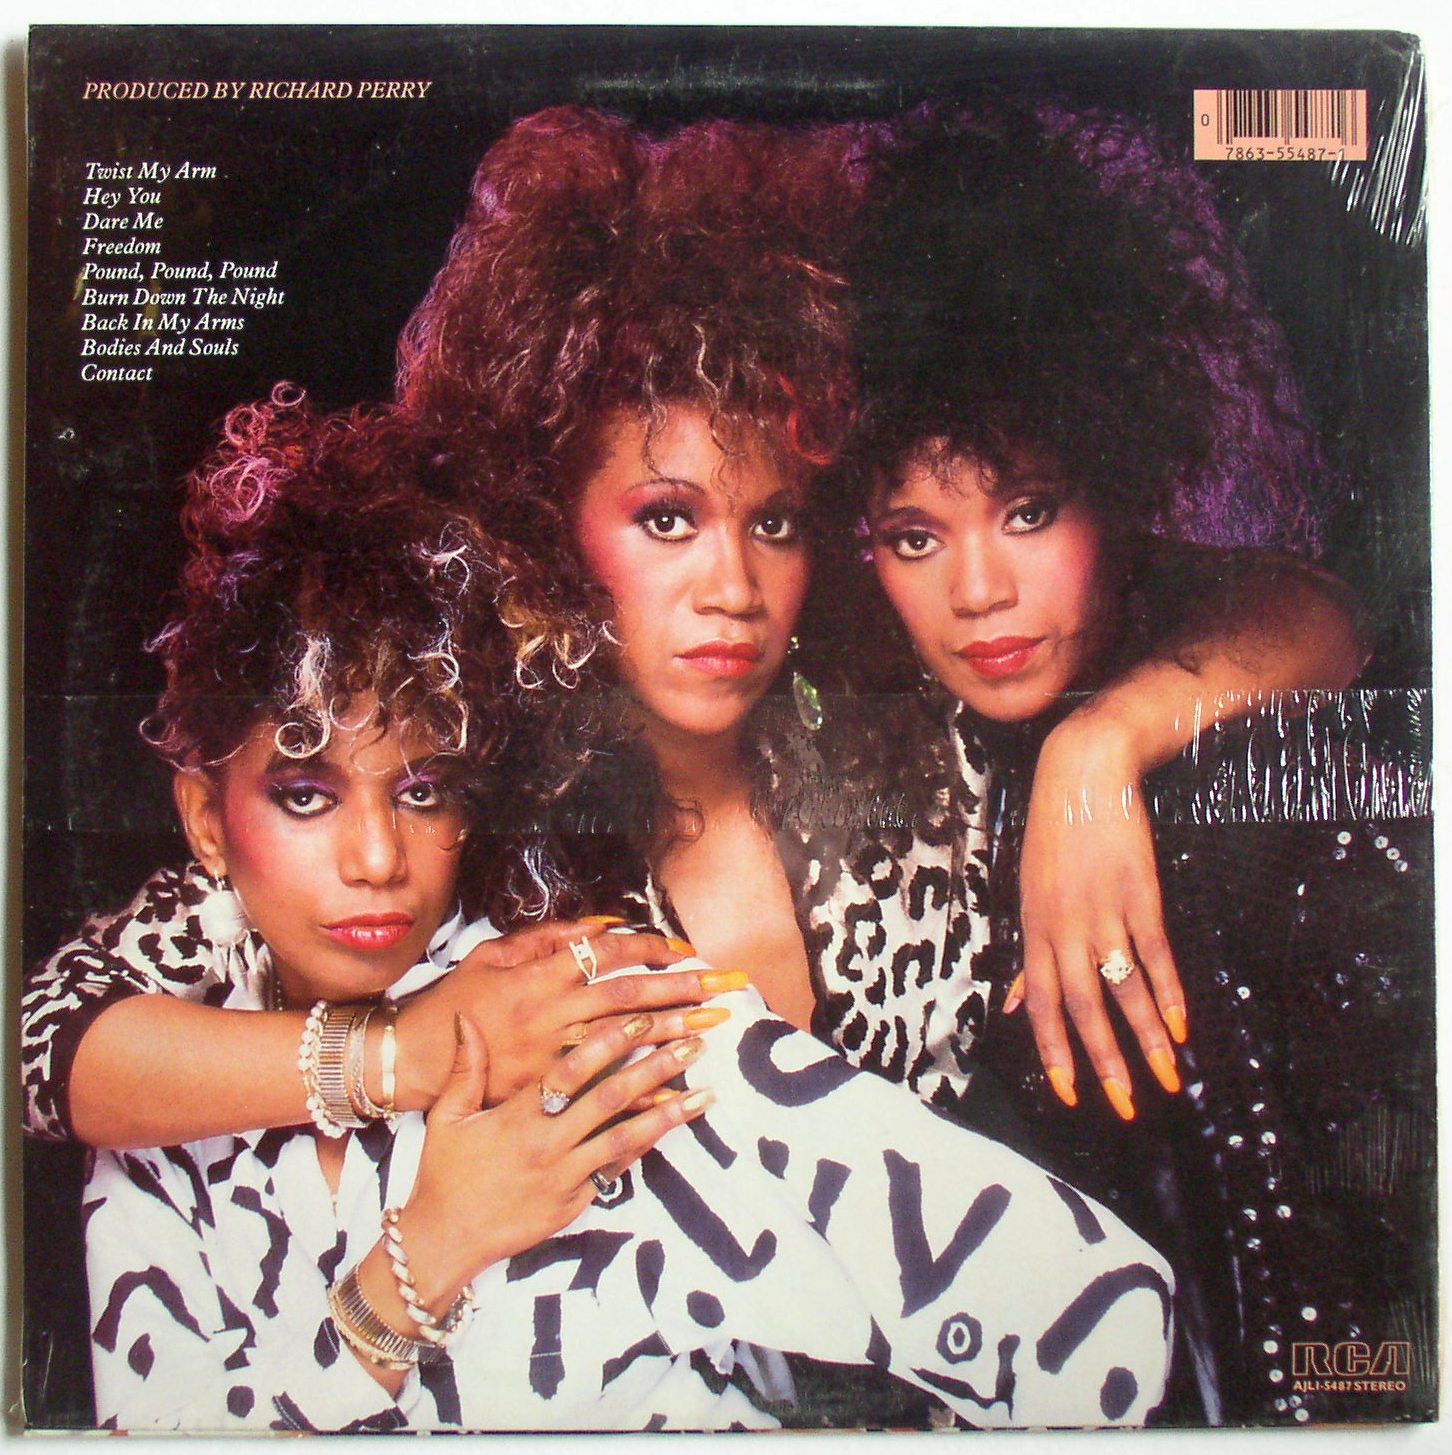 G sisters. The Pointer sisters в молодости. Сёстры LP. The Pointer sisters - i'm so excited год выпуска. Сестрички Live.